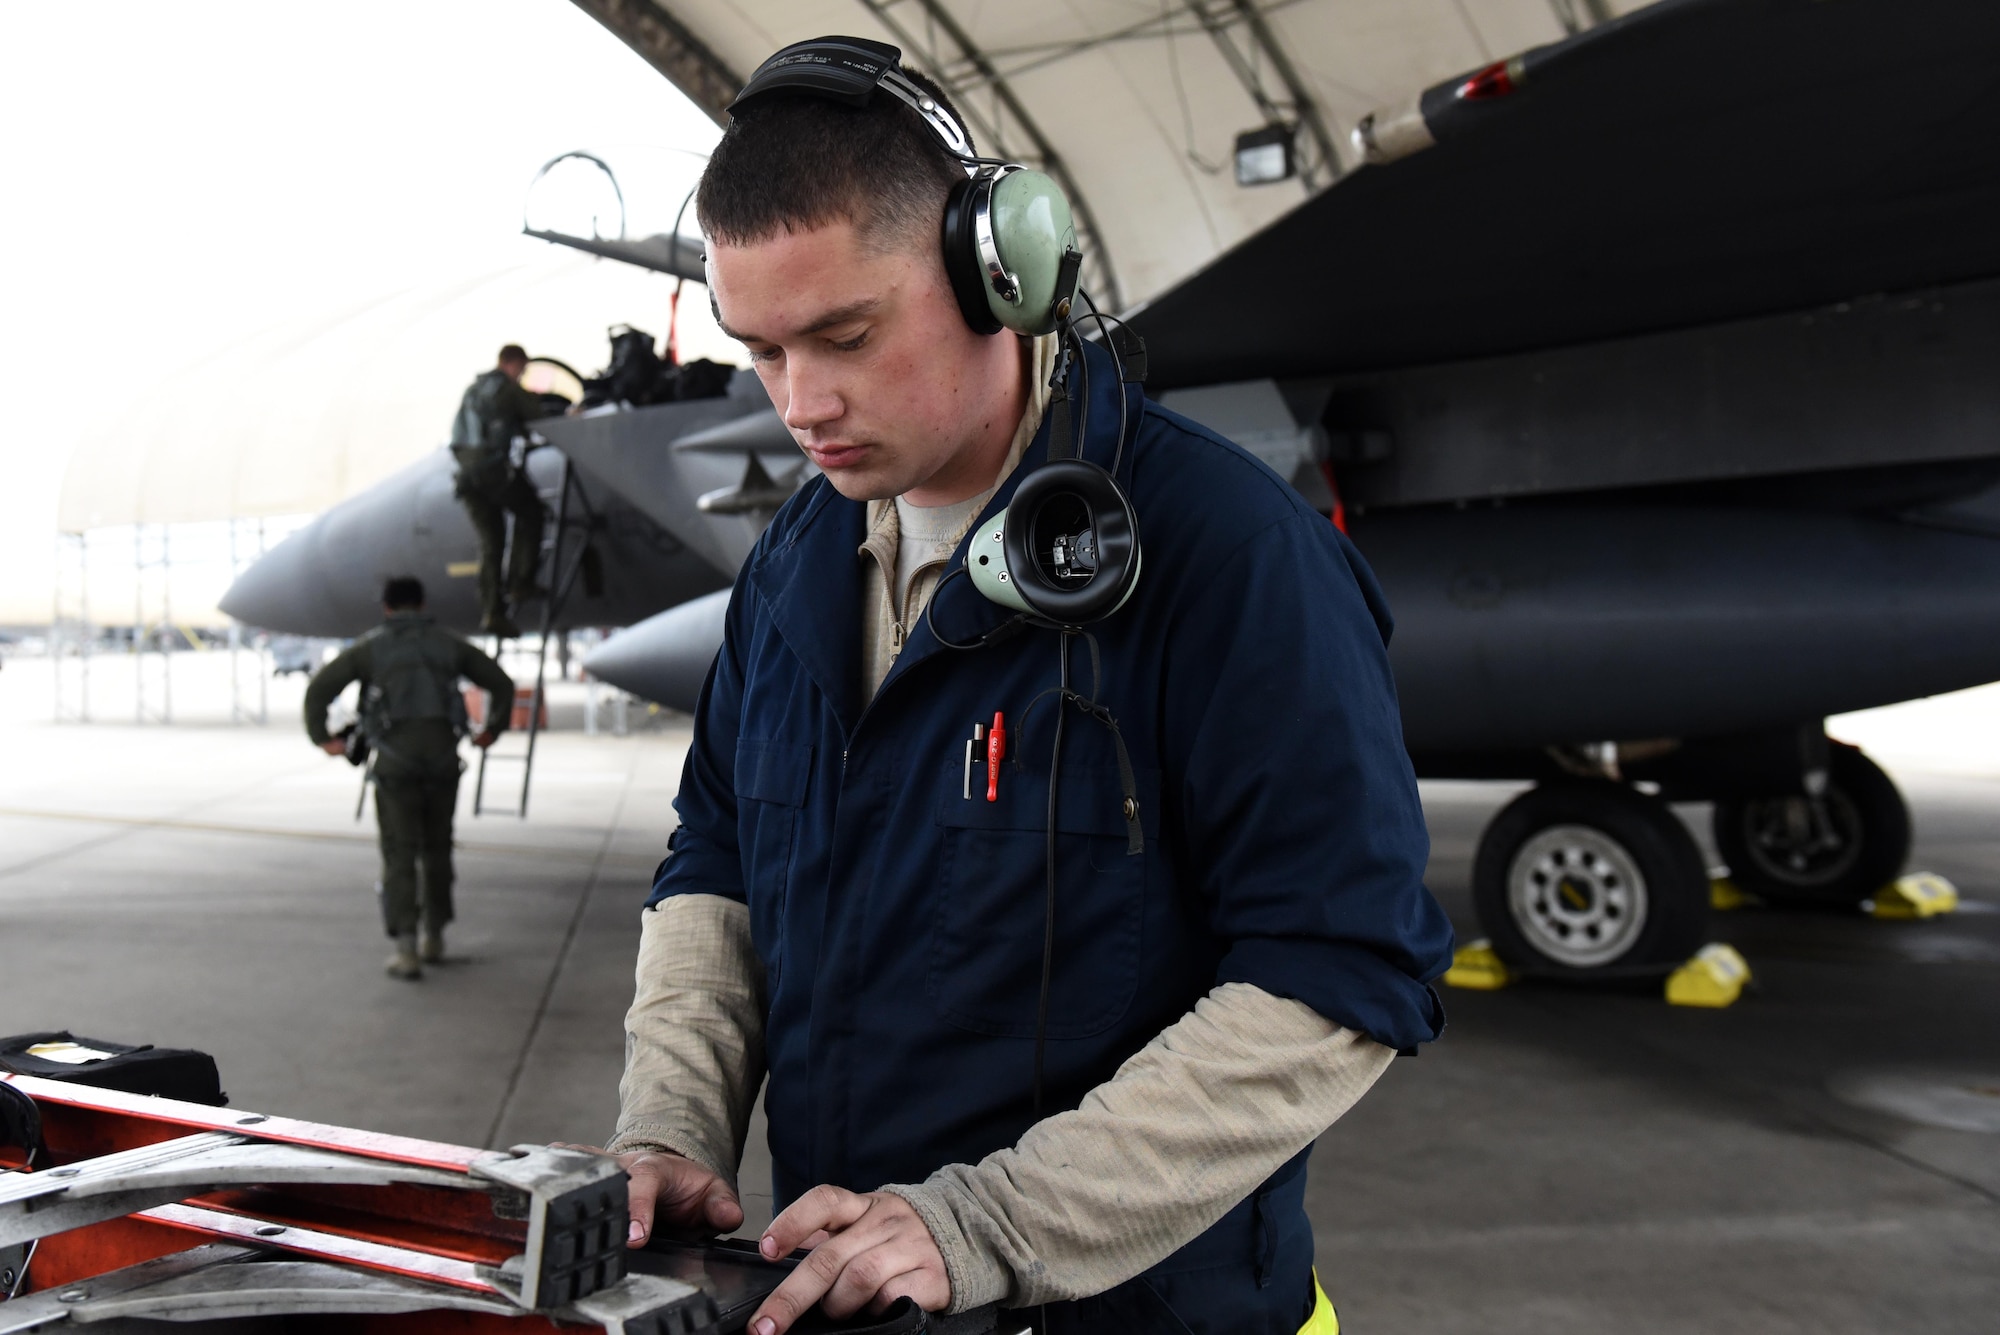 Senior Airman Nicholas Vanasse, 4th Aircraft Maintenance Squadron crew chief, conducts a pre-flight inspection during exercise Razor Talon, May 12, 2017, at Seymour Johnson Air Force Base, North Carolina. Both crew chiefs and aircrew conduct inspections before the Strike Eagle taxis to the end of the runway. (U.S. Air Force photo by Airman 1st Class Victoria Boyton)